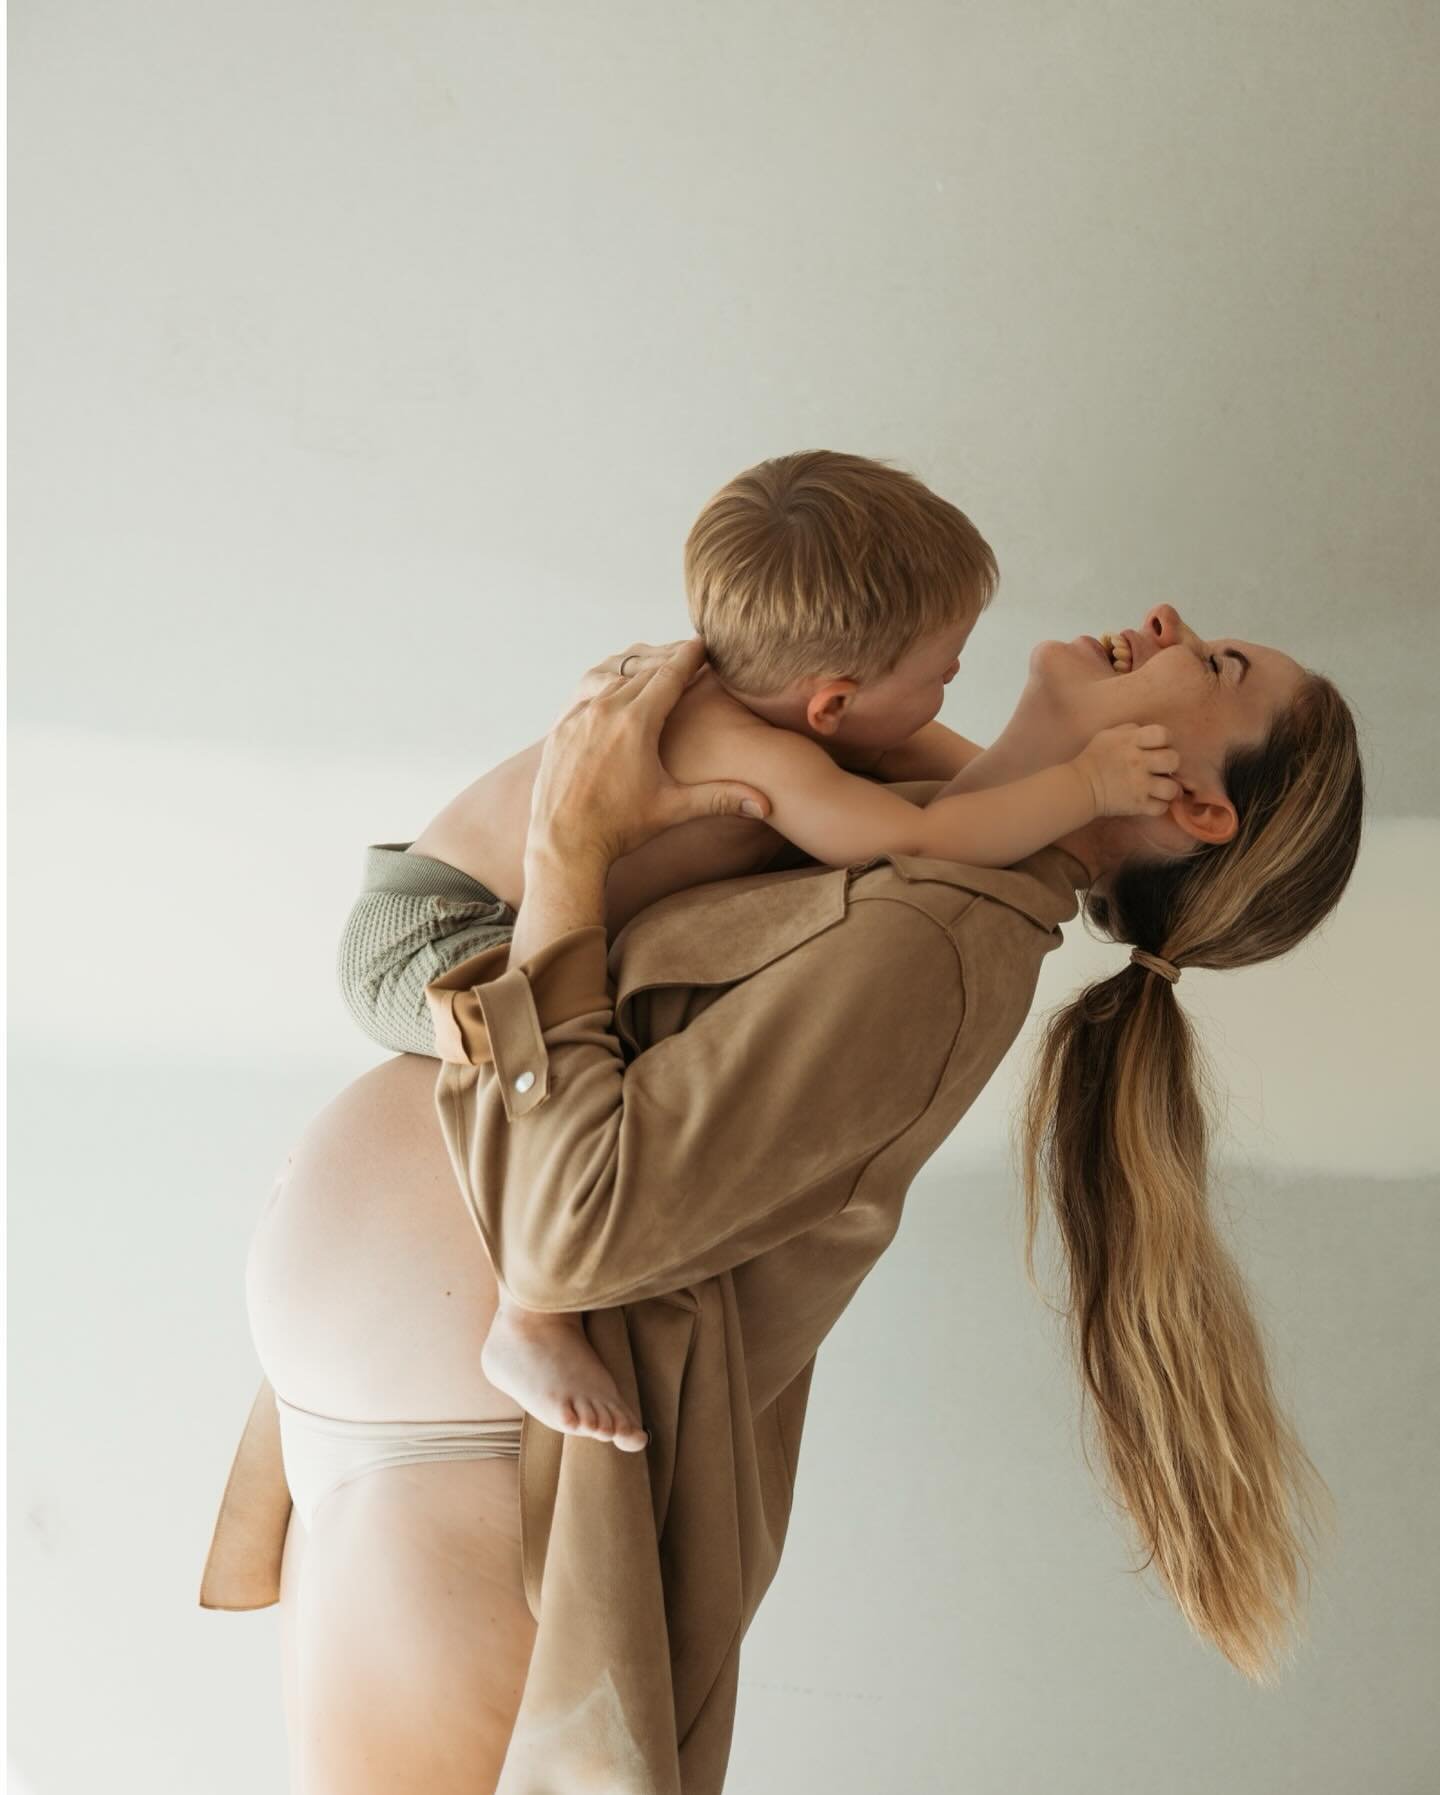 Bring me alllll the maternity studio sessions 🤎

The studio is so damn close to being finished now, but, the impatience still got the better of me&hellip; industrial vibes it was!

So in we went, to capture the magic of maternity, to embrace the bea